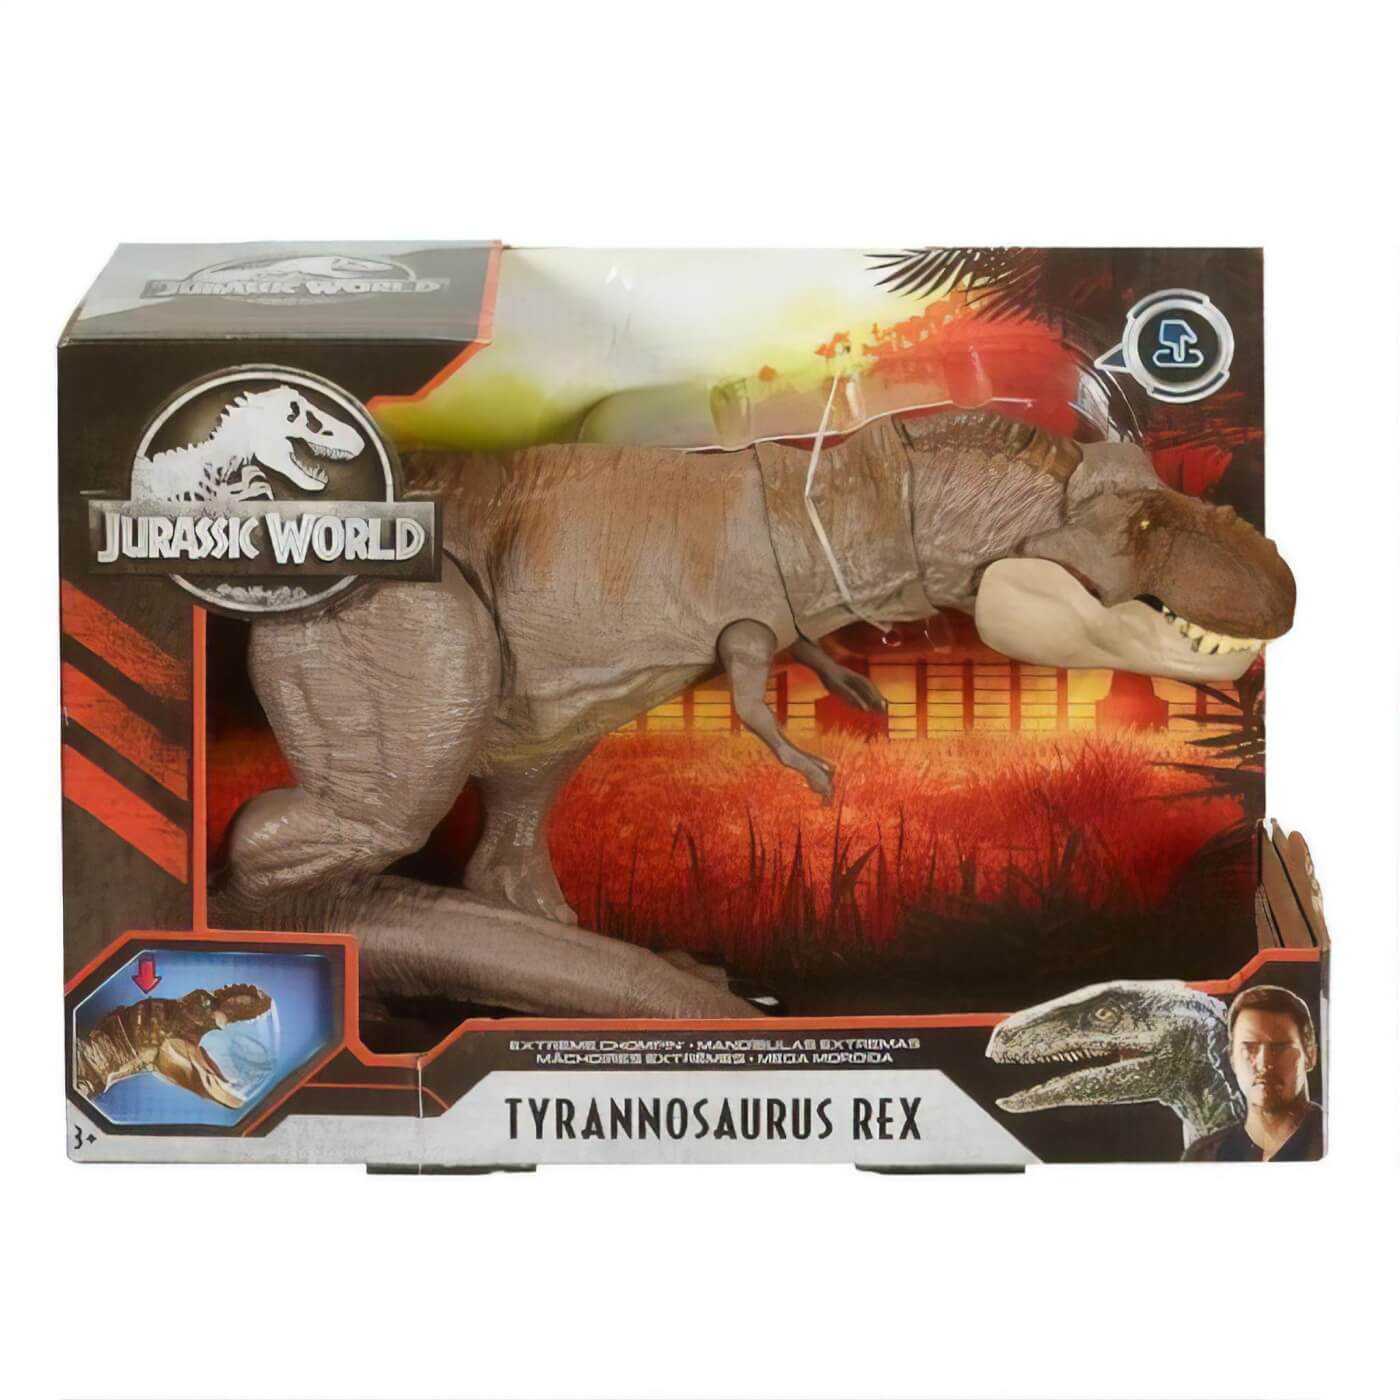 Upcoming Jurassic World Primal Attack Toys Now Available for Pre-Order at  Entertainment Earth! | Jurassic Outpost